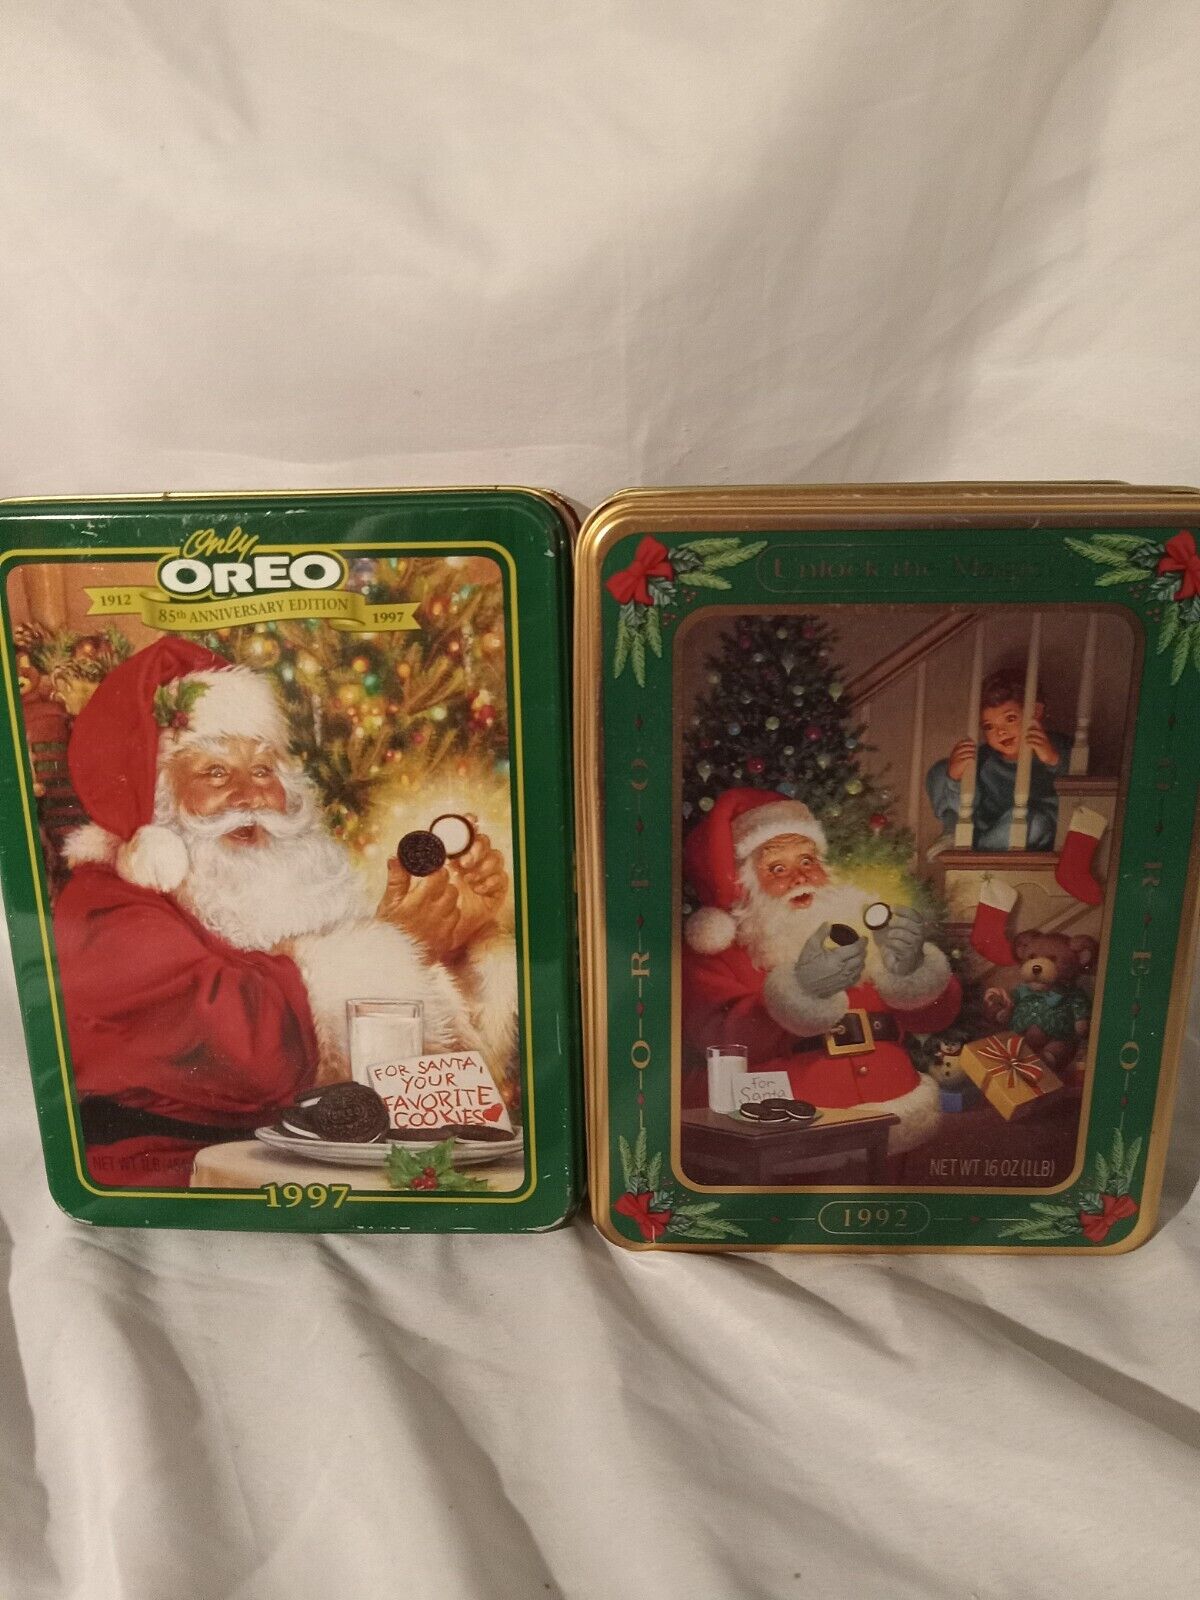 Christmas Tins With Ornaments Oreo Tins 1997/1992 Small Ornaments Plastic 1-3 in